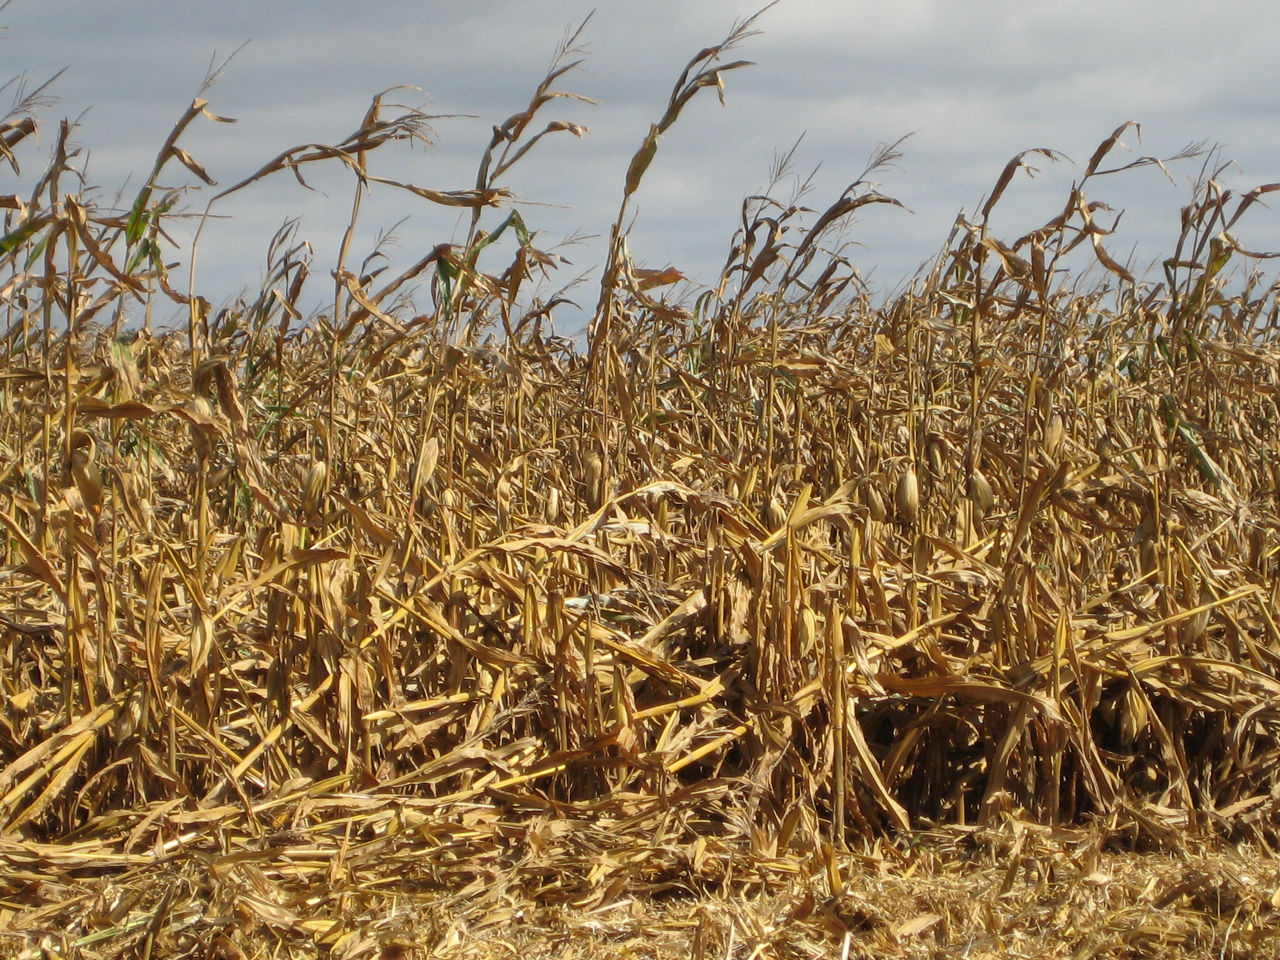 Corn stalk lodging in the fall due to cannibalization and stalk rots